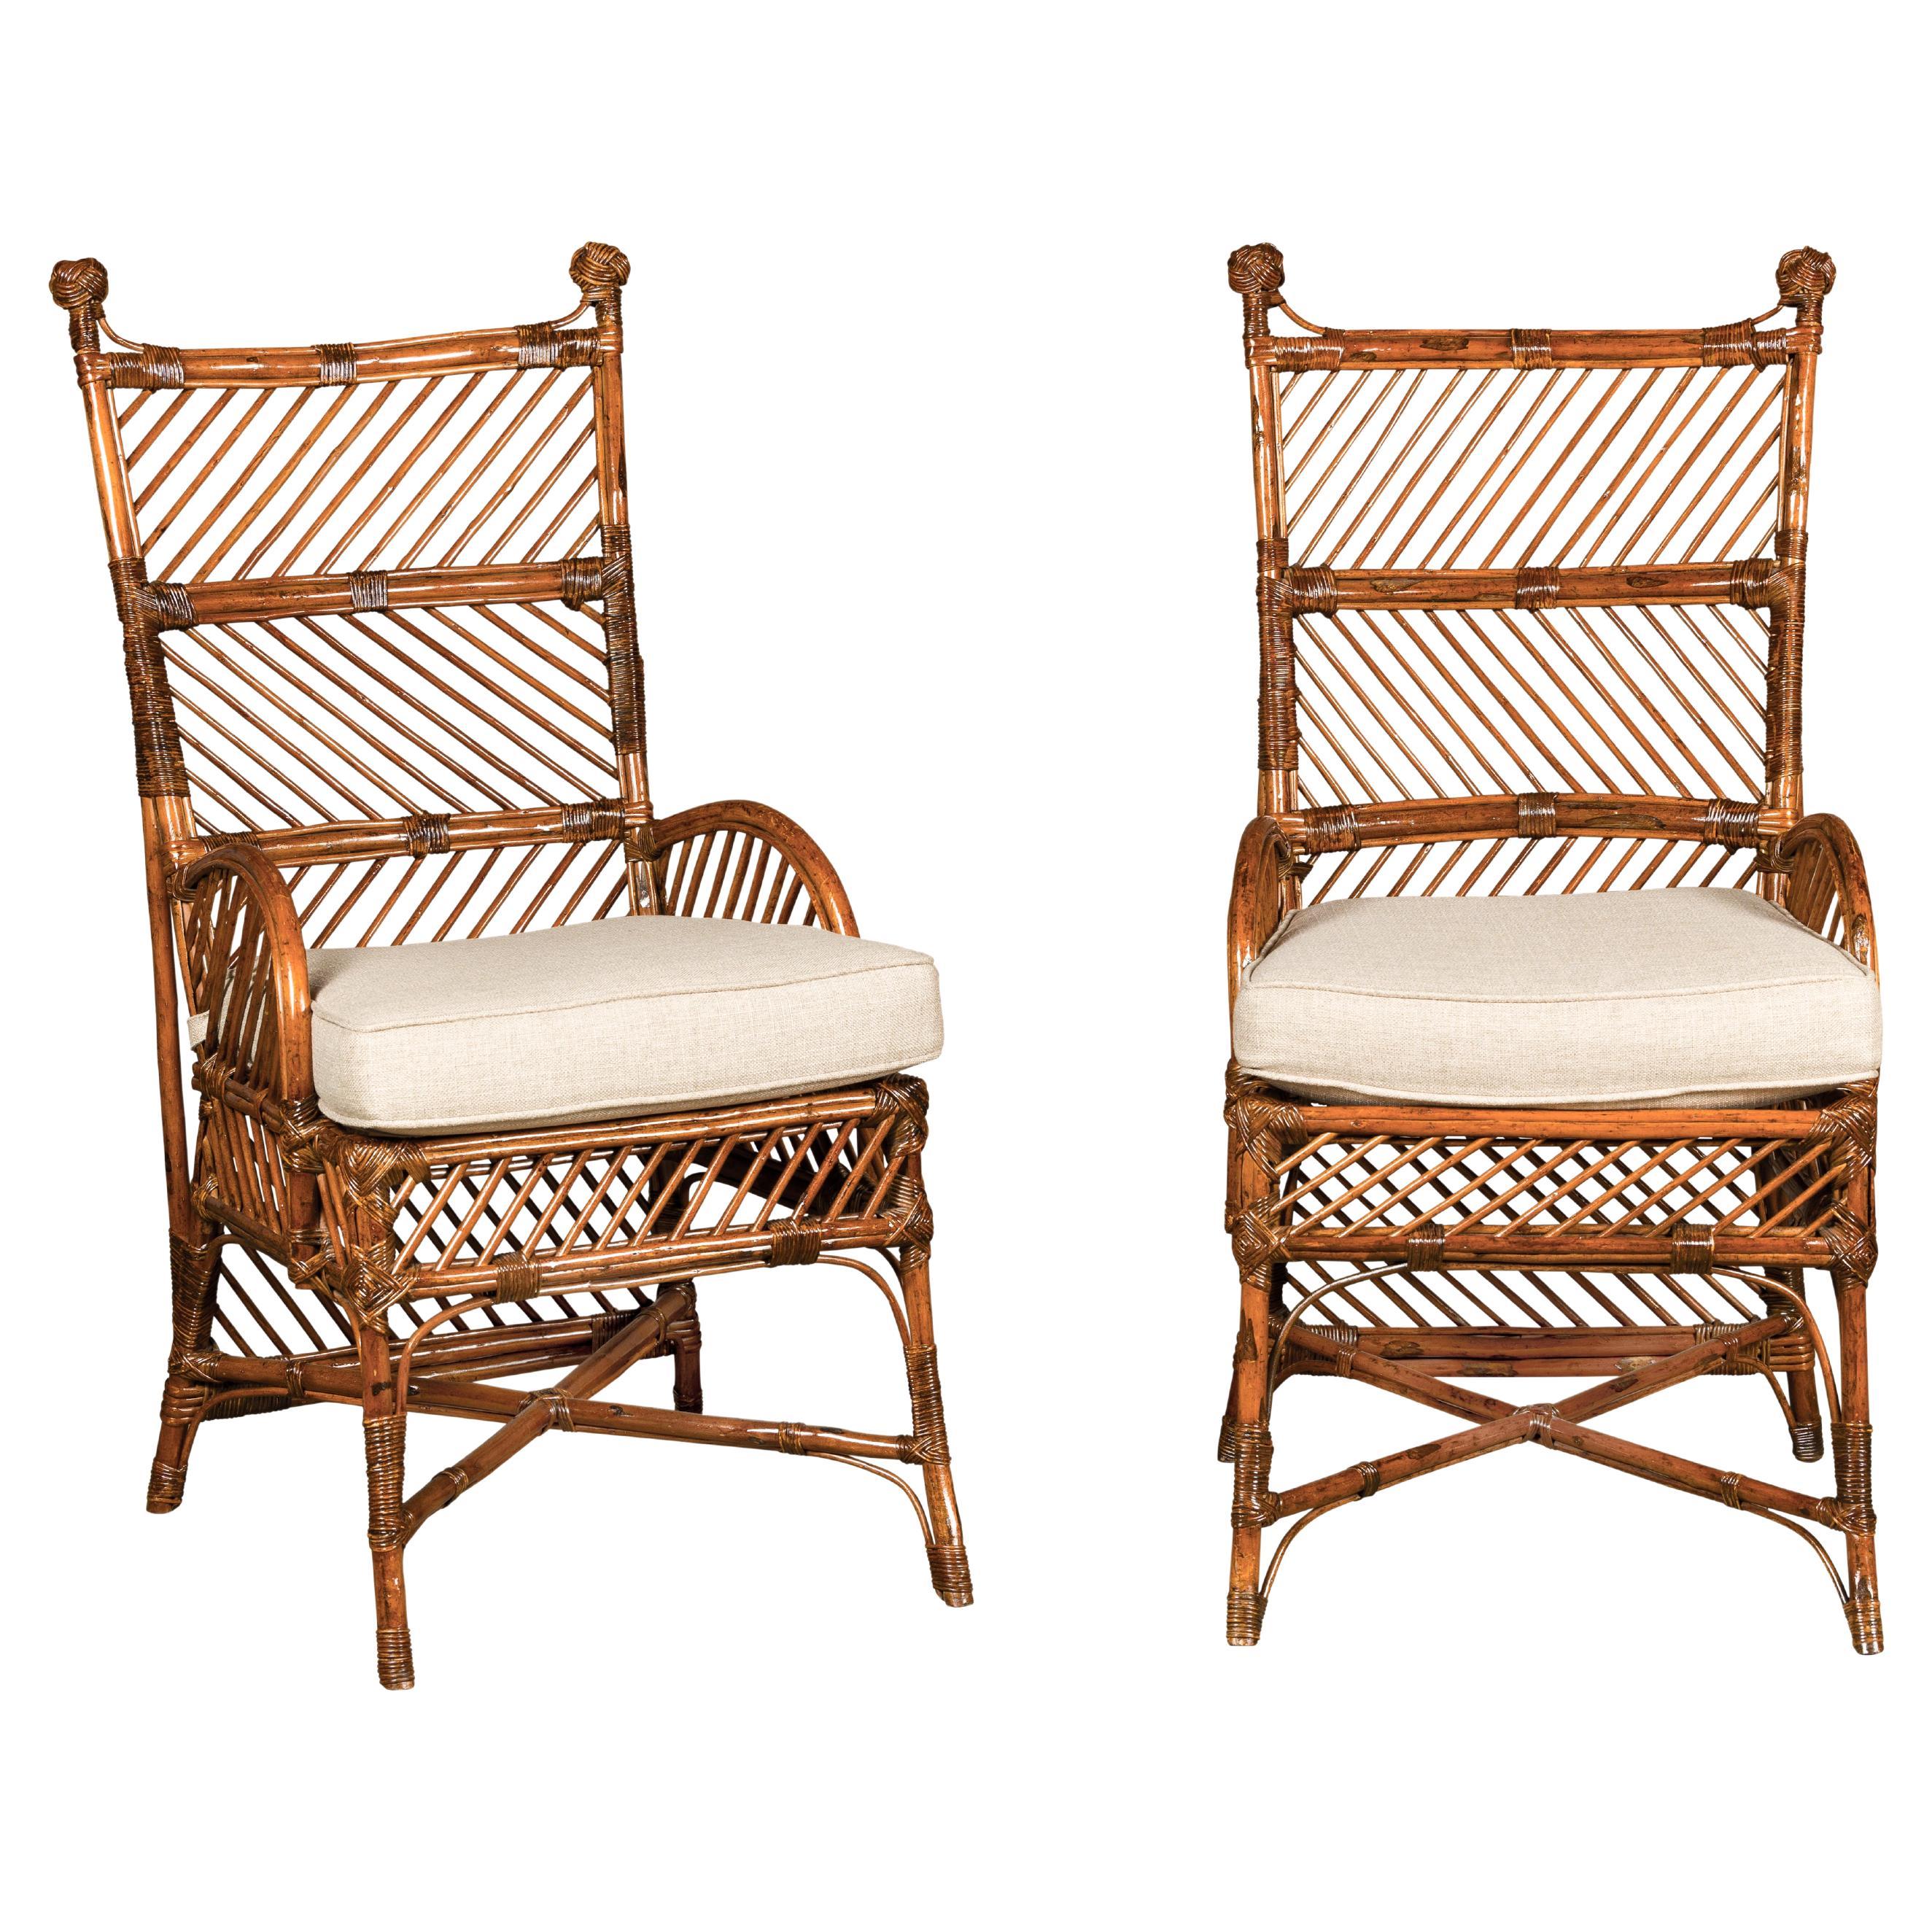 Pair of English 1890-1920s Bamboo and Rattan Chairs with Custom Cushions